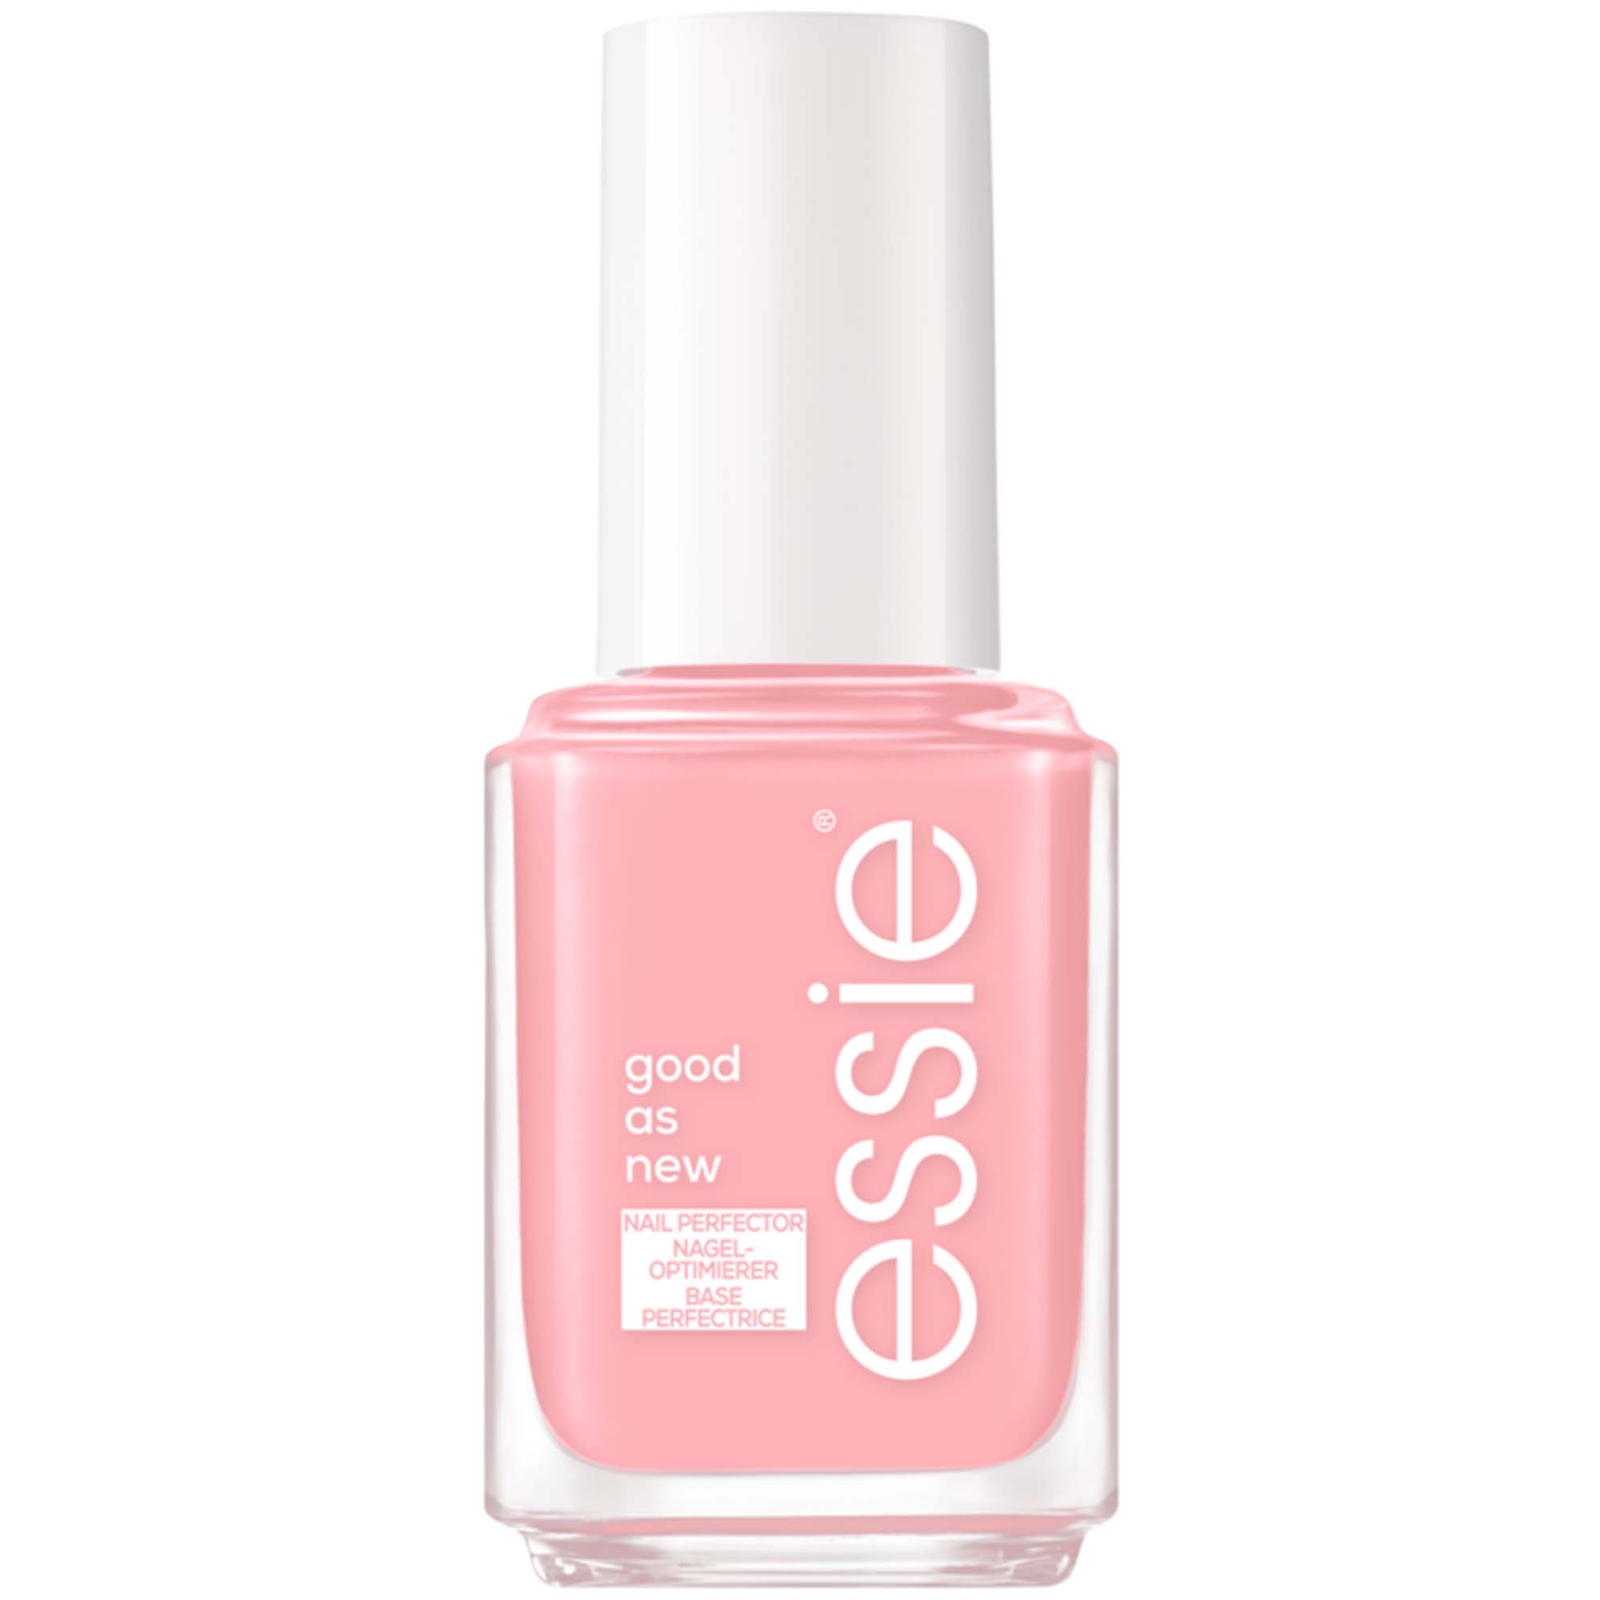 Essie Nail Care Treatment Good As New Nail Perfector (various Shades) - Sheer Pink In White